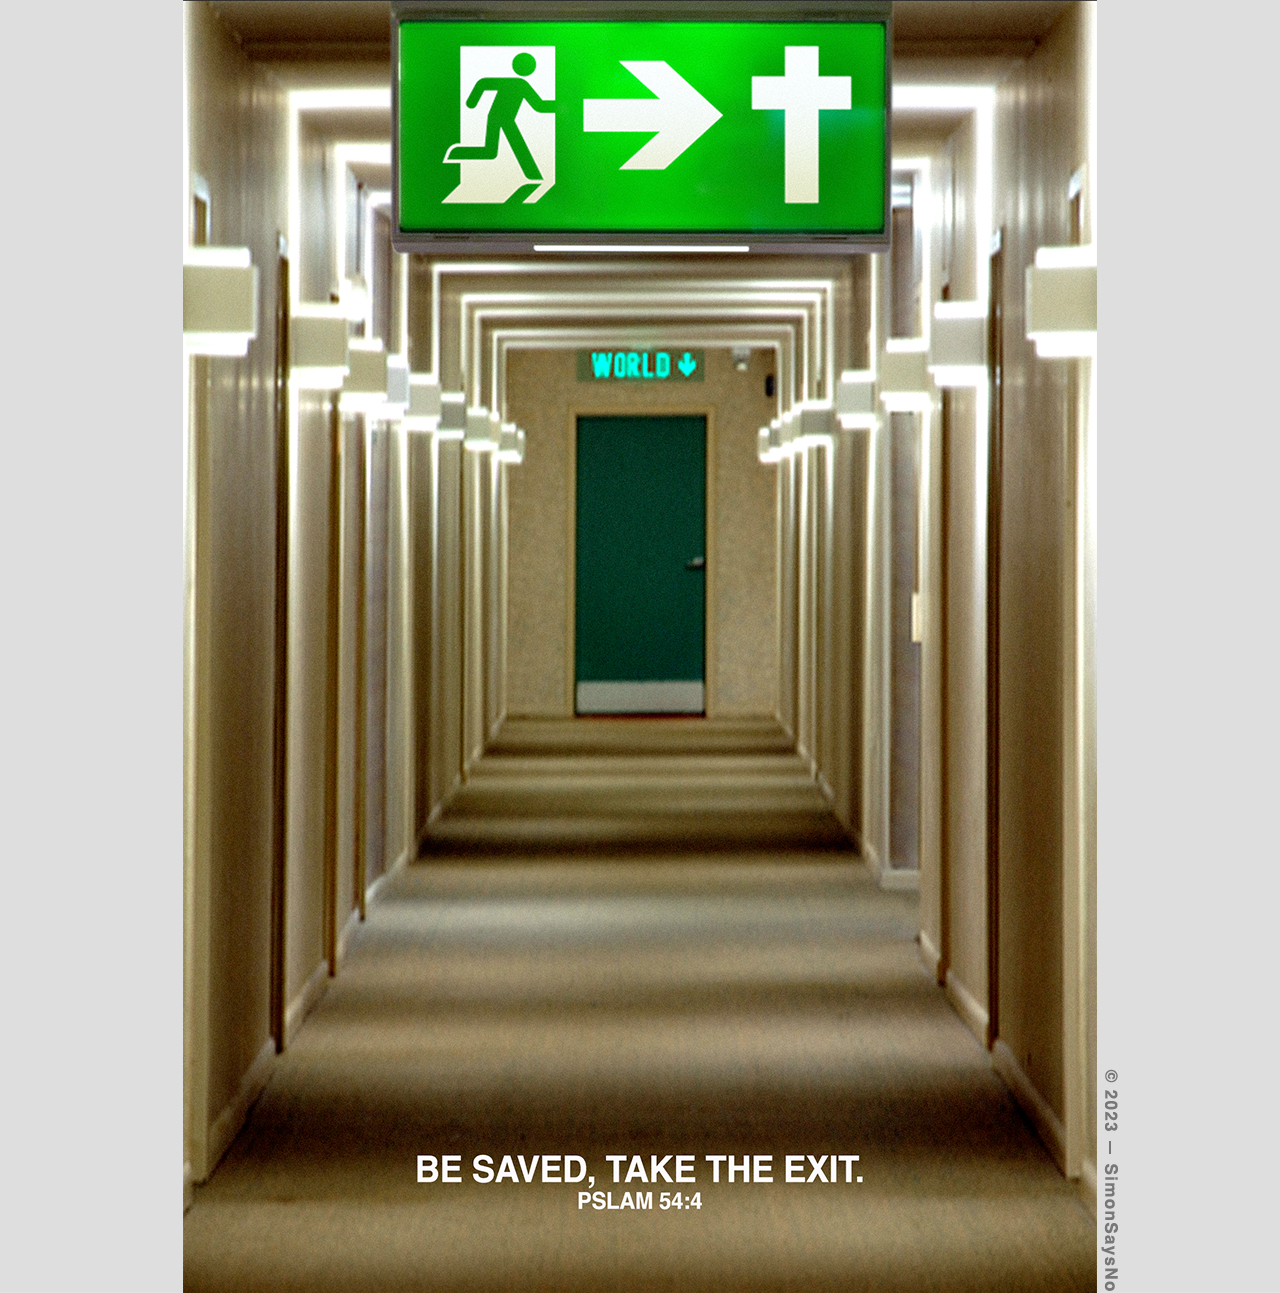 BE SAVED, TAKE THE EXIT.